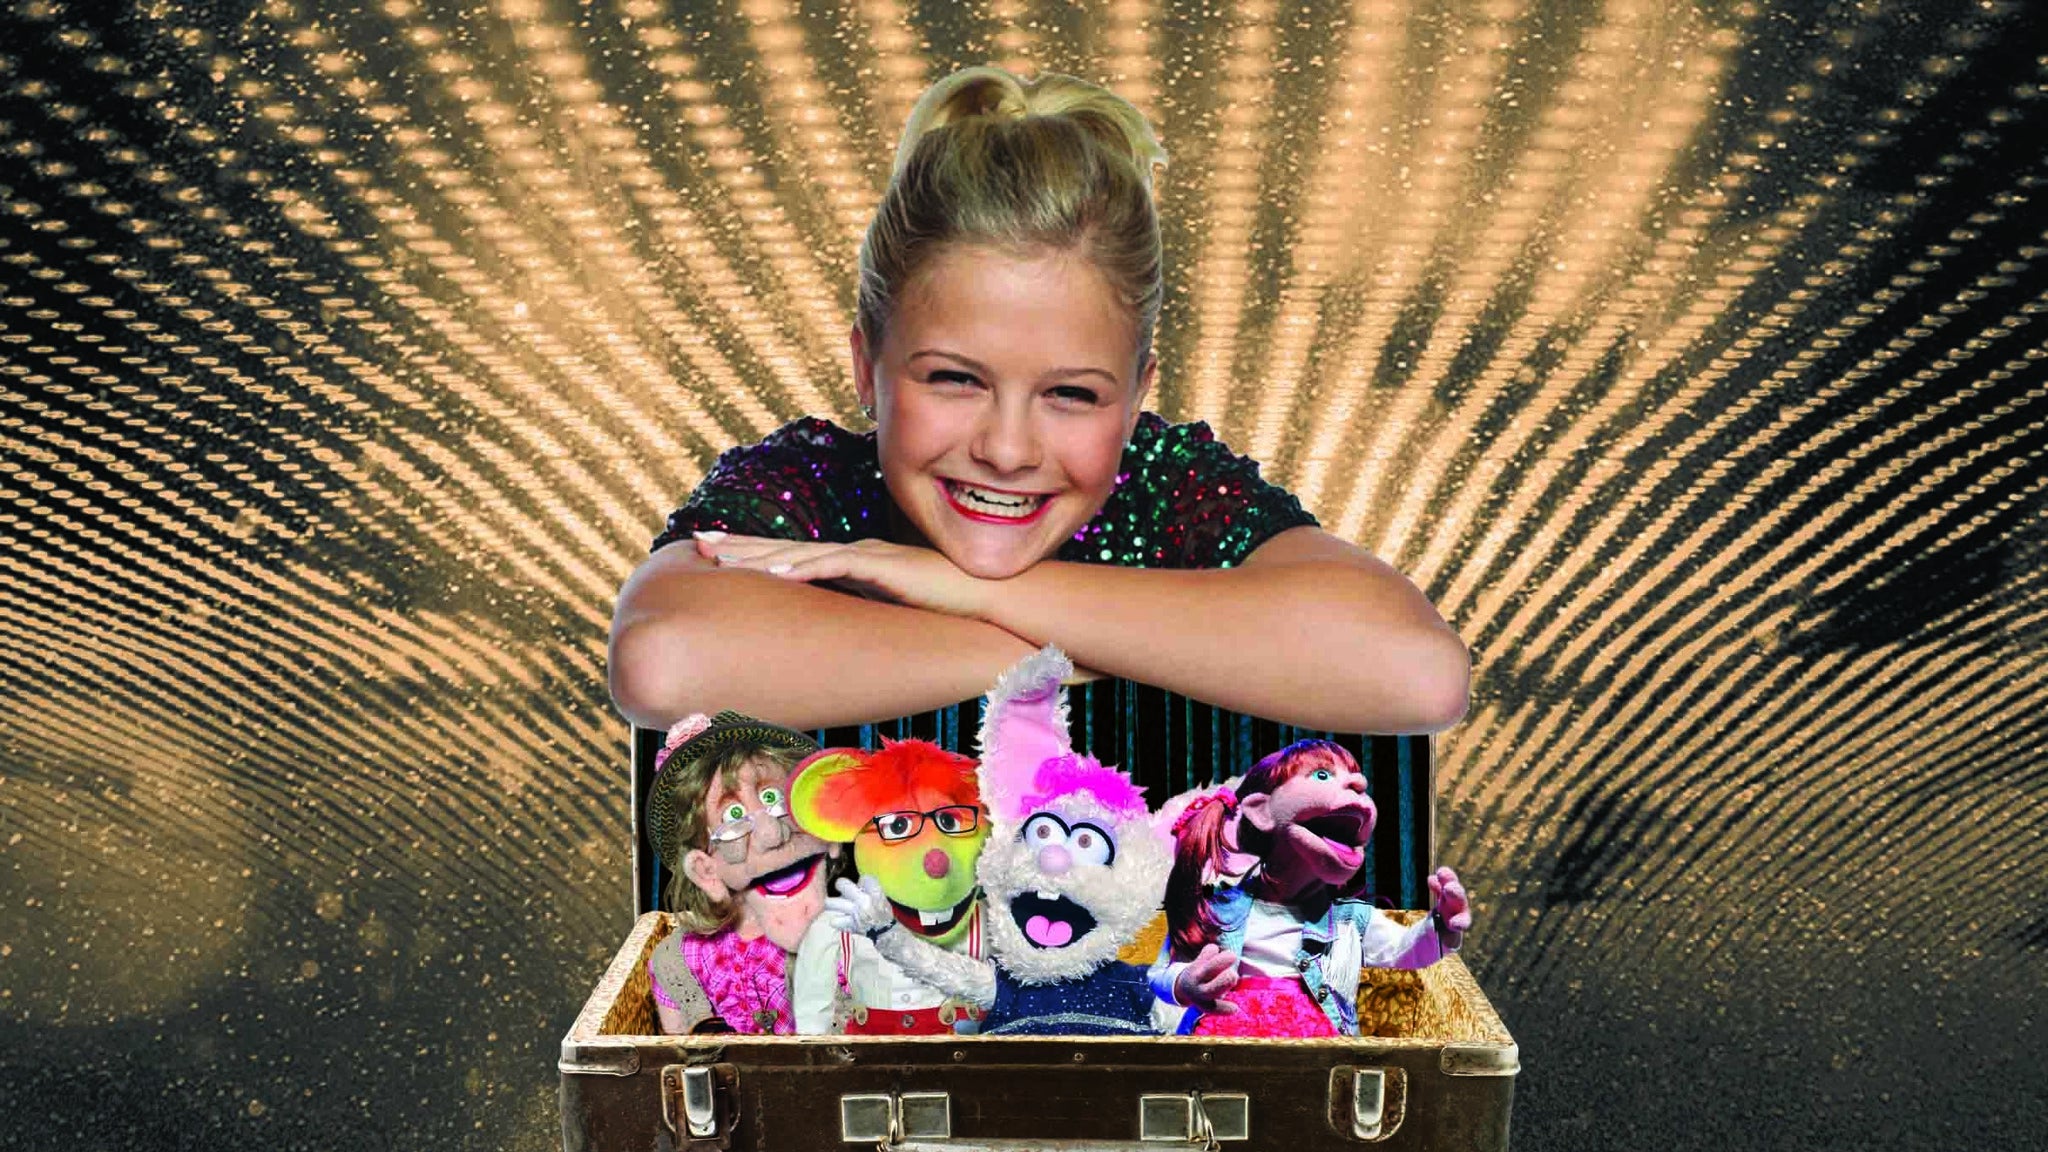 Darci Lynne: My Lips Are Sealed (Except When They're Not) in Reno promo photo for VIP Package Onsale presale offer code